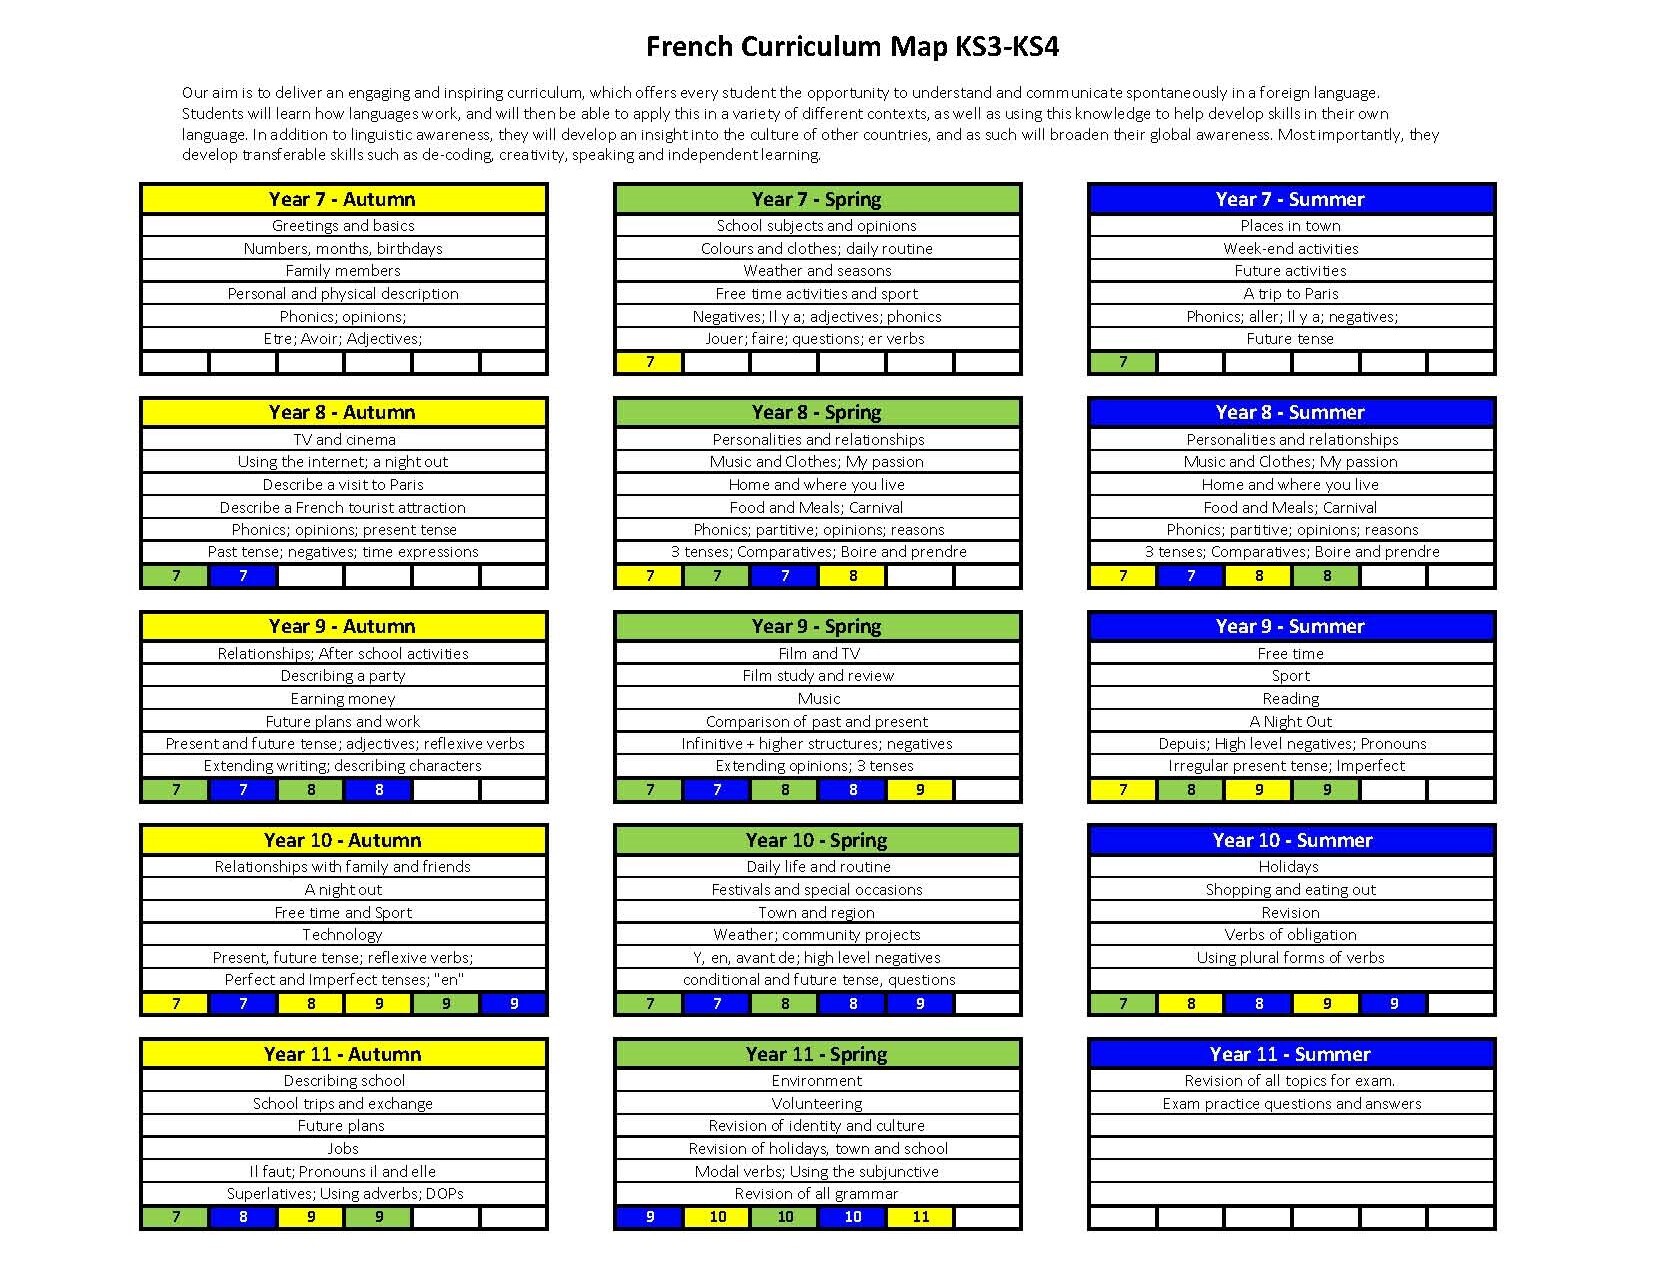 Ks3 4 curriculum map french